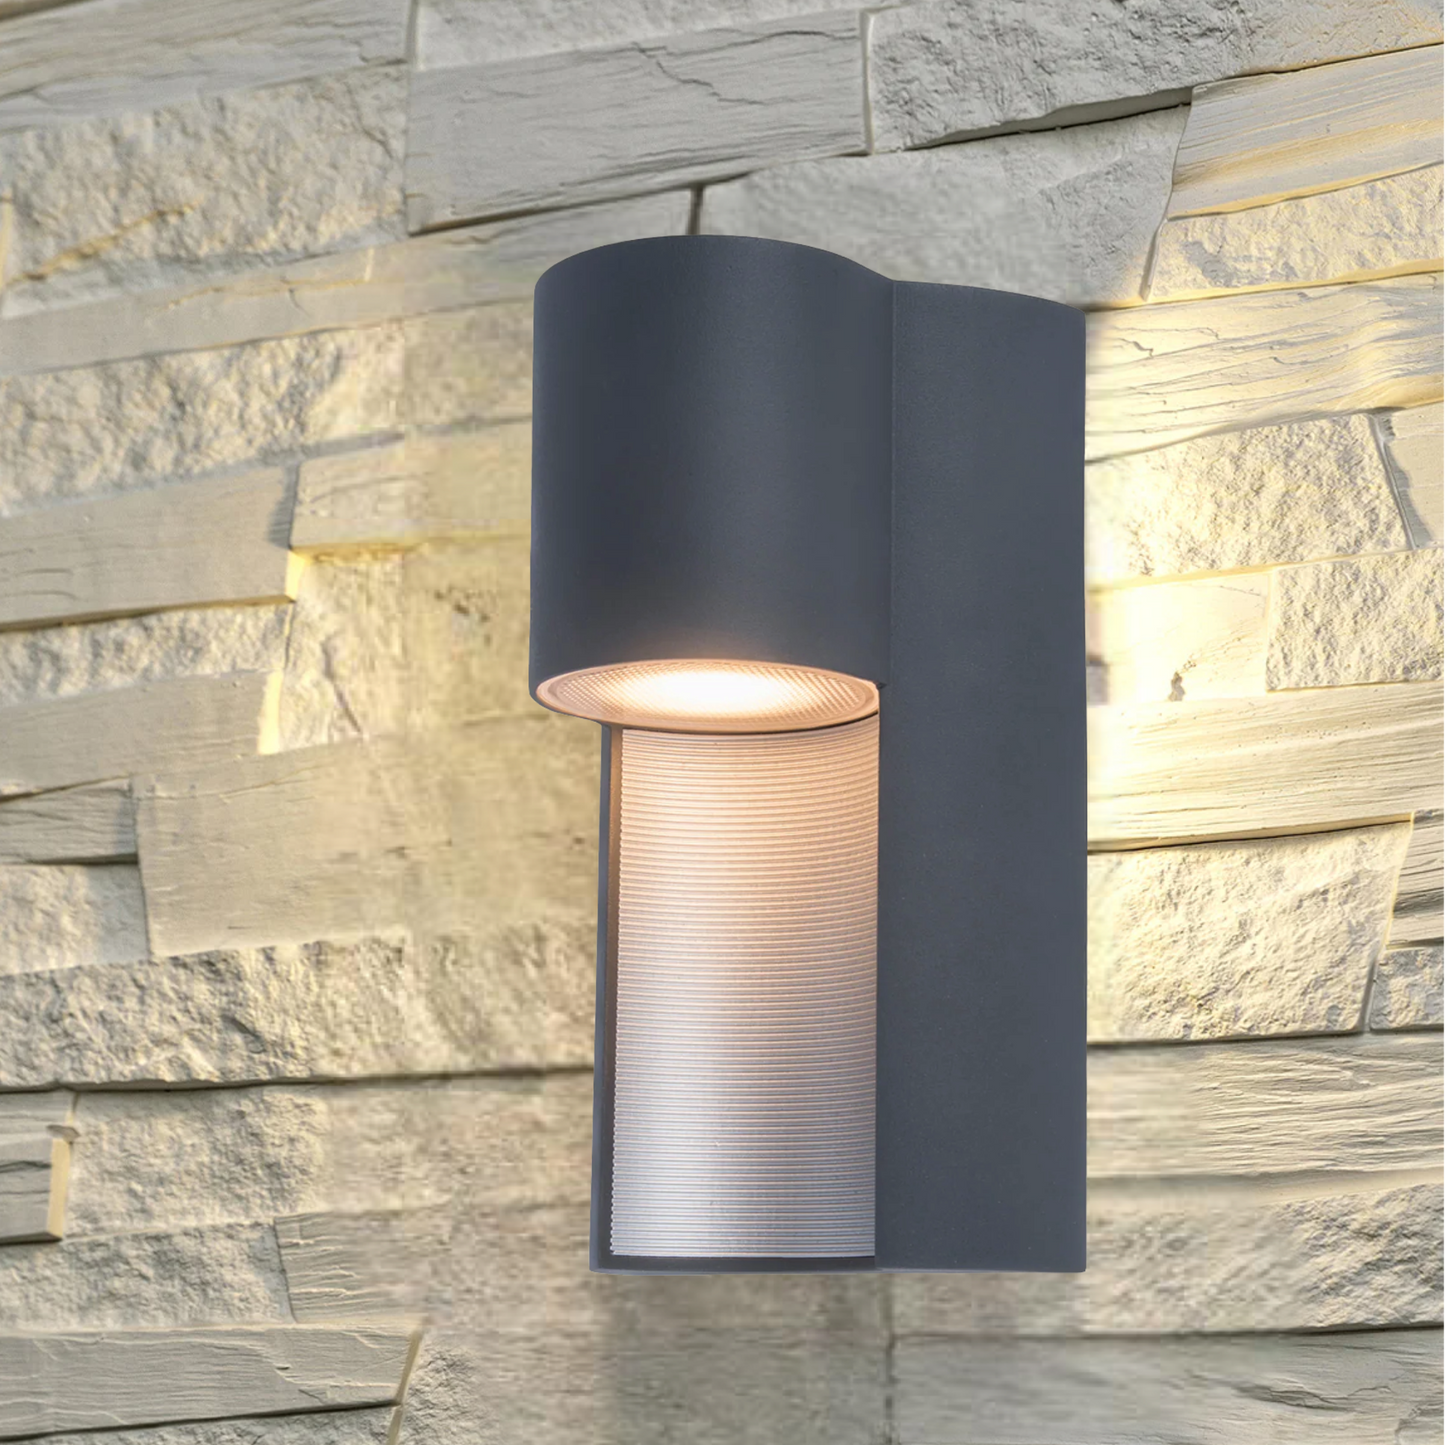 ﻿Our Gemma dark grey outdoor curved wall light would look perfect in a modern or more traditional home design. Outside wall lights can provide atmospheric light in your garden, at the front door or on the terrace as well as a great security solution. It is designed for durability and longevity with its robust material producing a fully weatherproof and water resistant light fitting. Use LED bulbs to make this light energy efficient and low cost to run